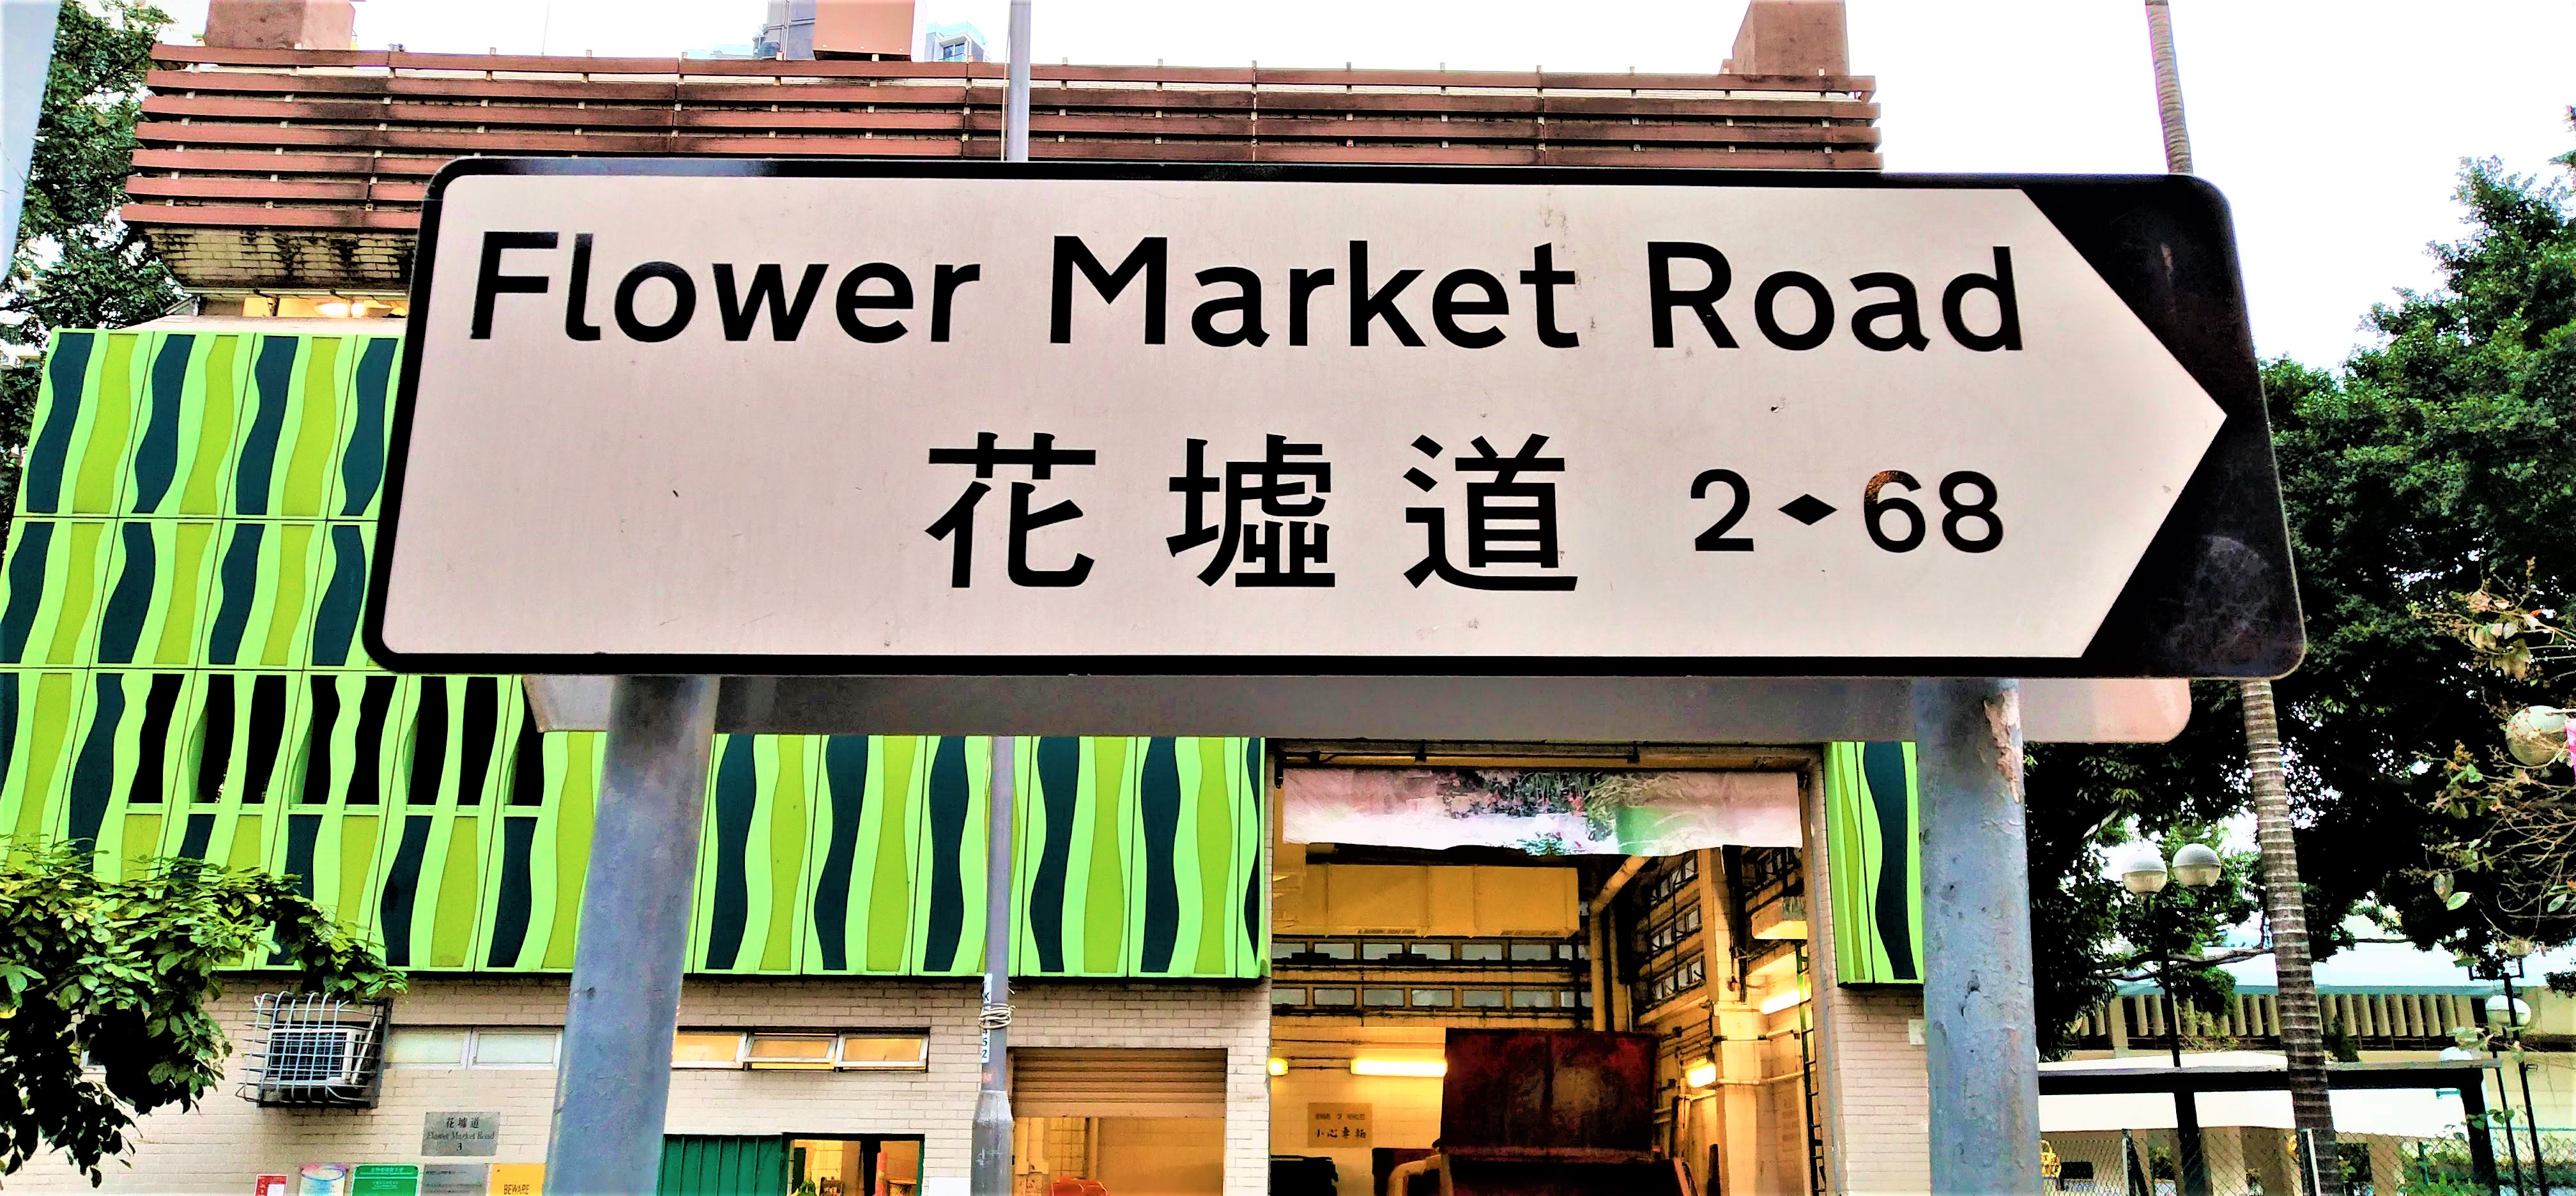 Prince Edward might buy flowers at the old site of Flower Market. Now the Flower Market is at the Flower Market Road.